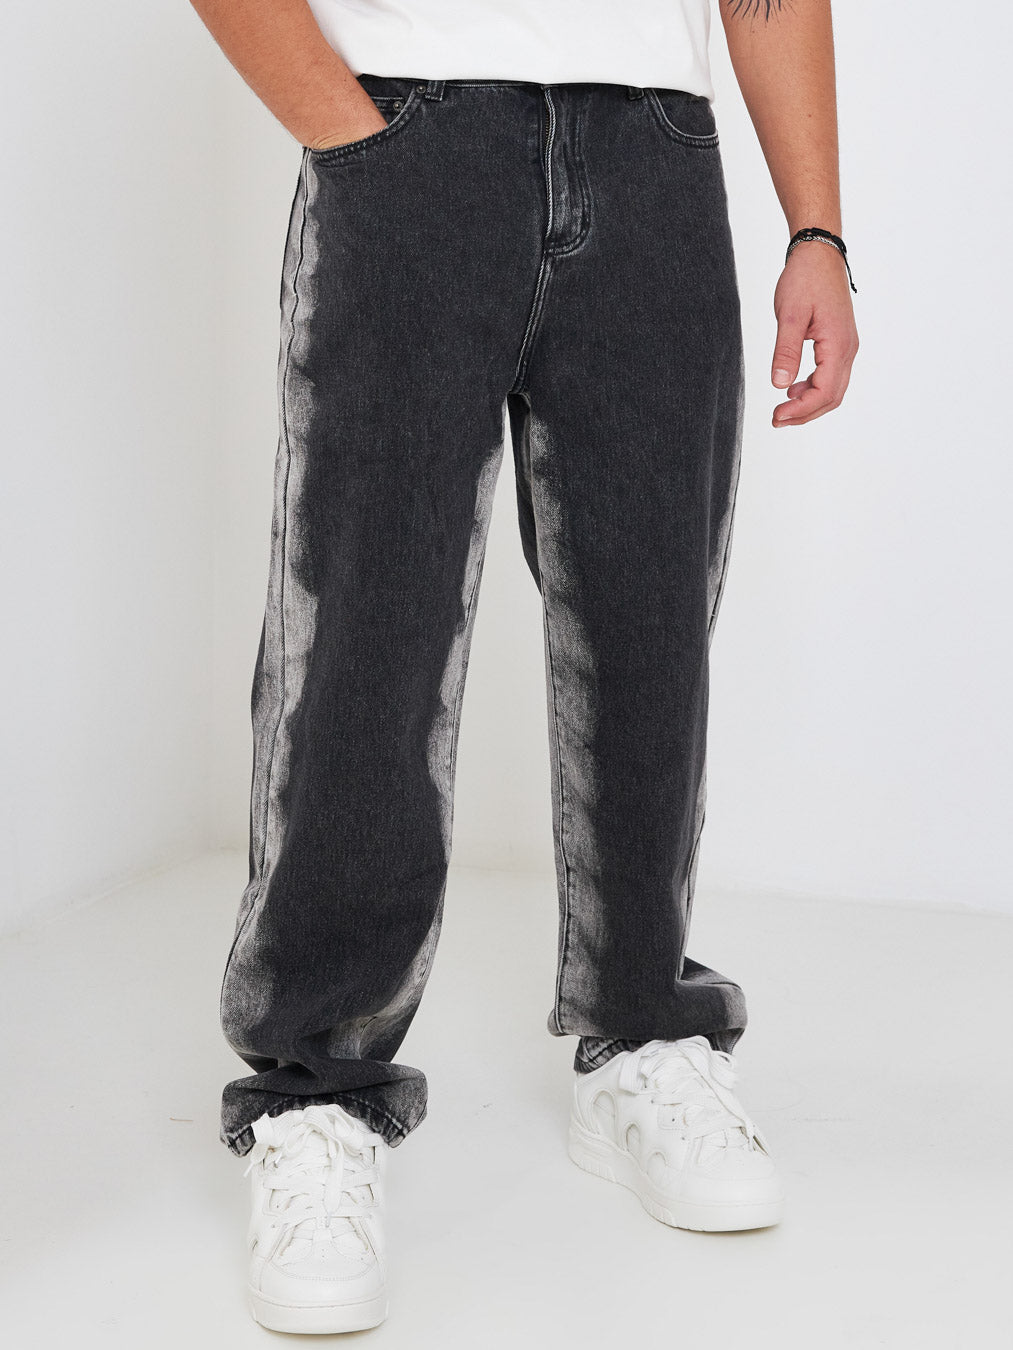 Acupuncture gray jeans with shaded effect on the sides